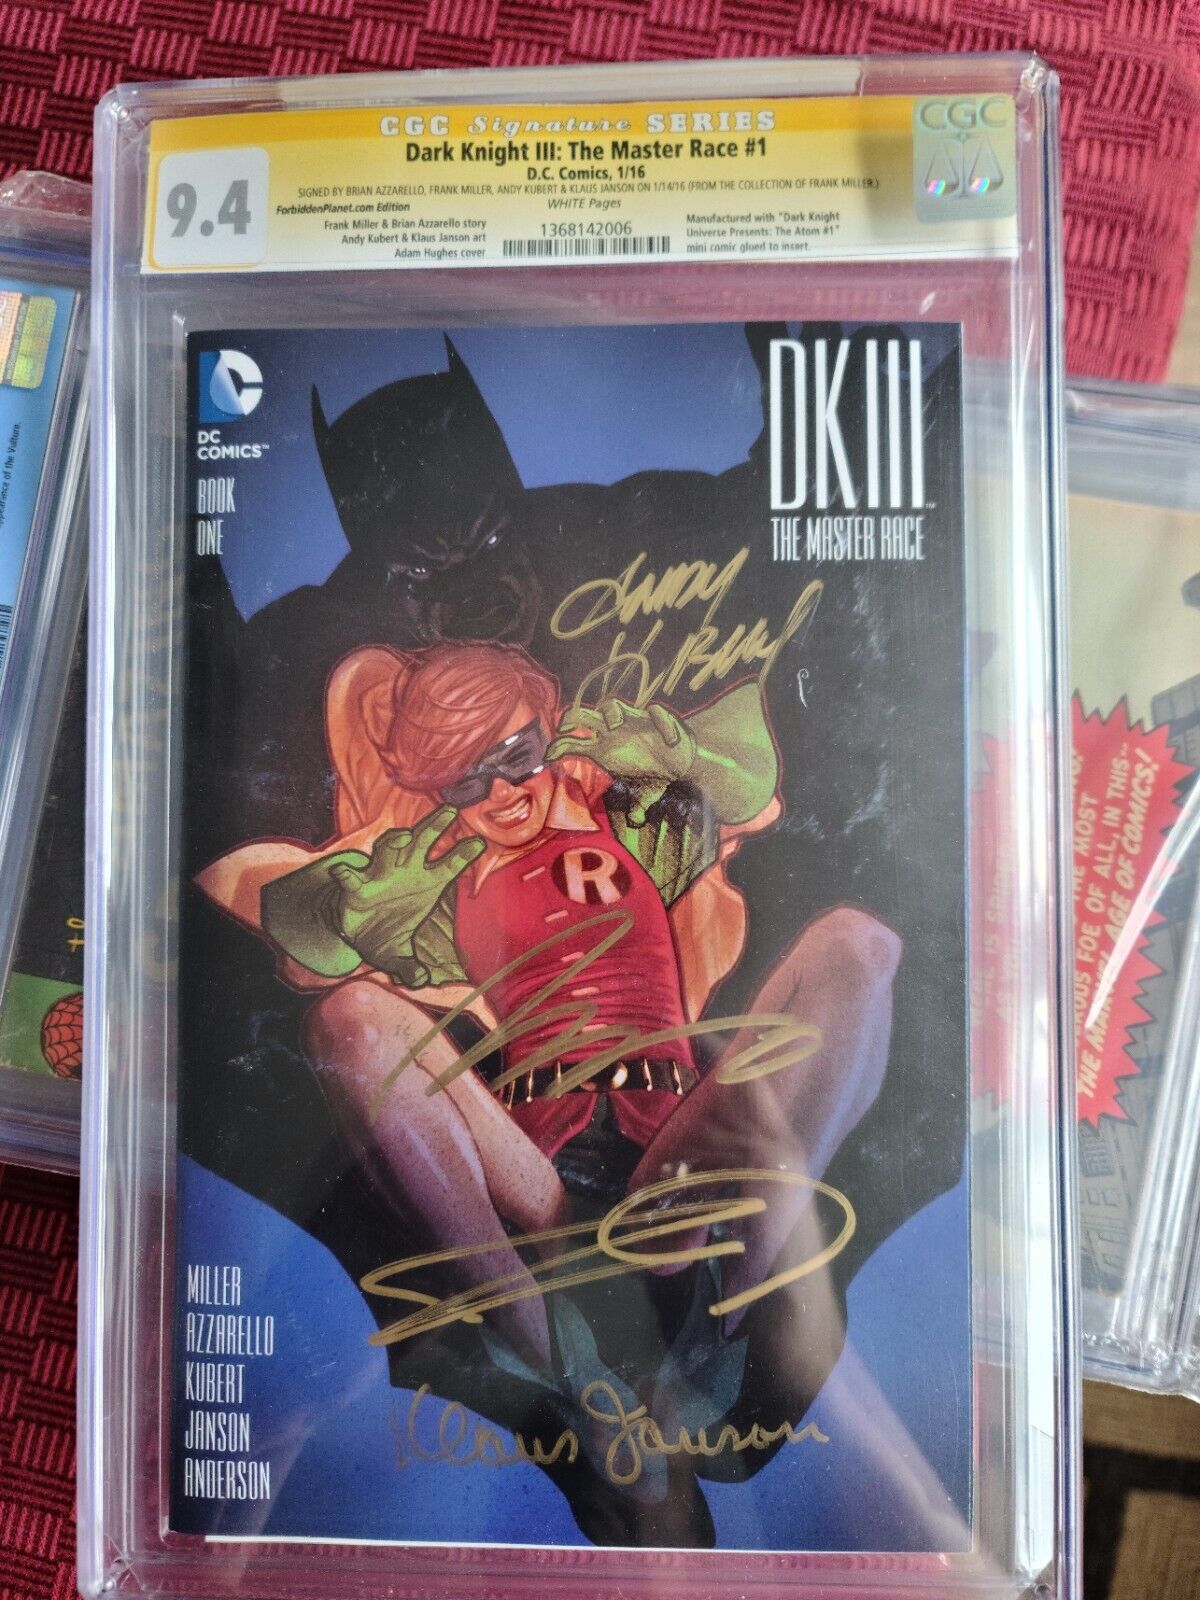 Dark Knight III Master Race #1 Forbidden Planet signed F. Miller and 3X CGC 9.4